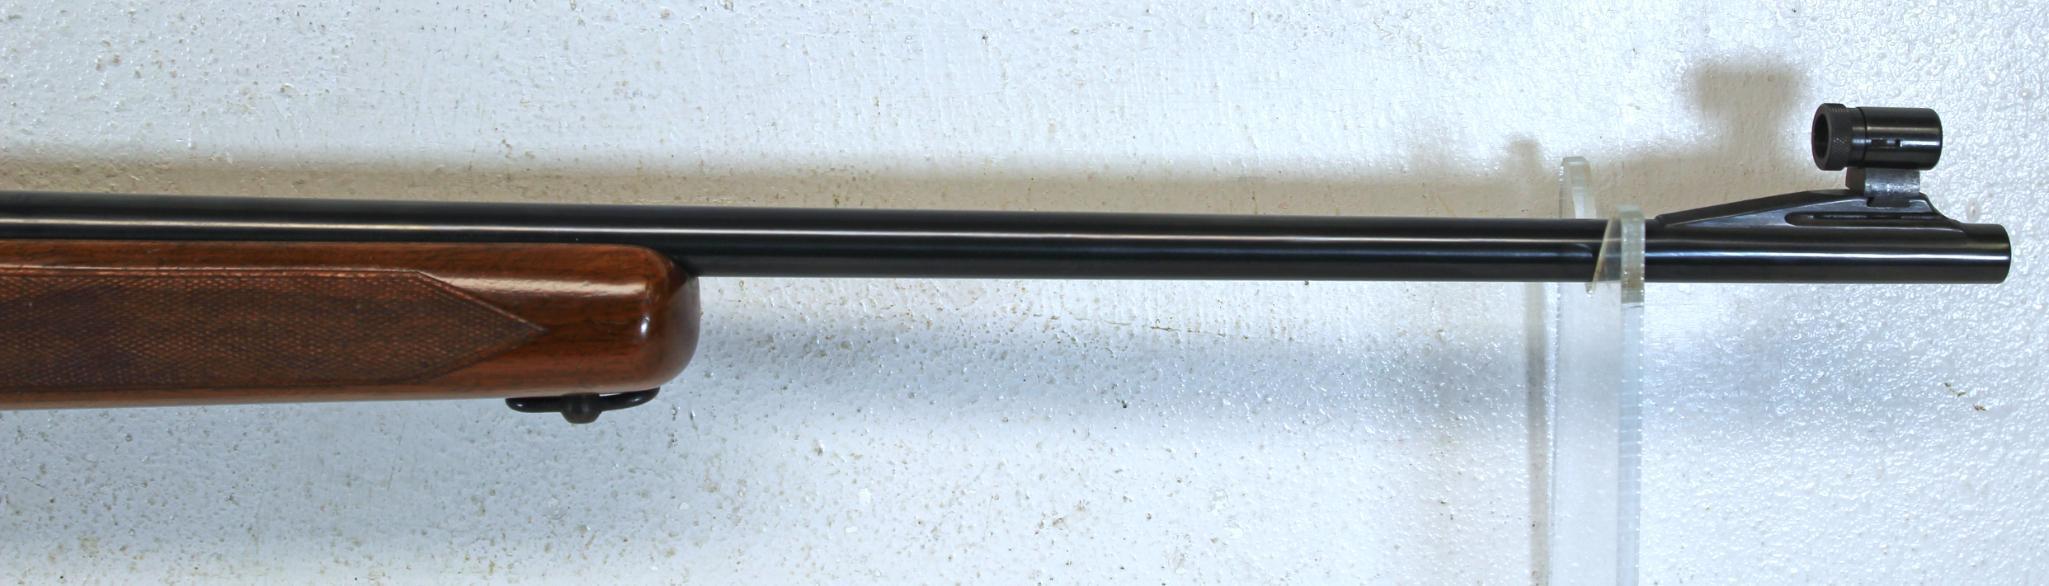 Winchester Model 75 Sporting Deluxe .22 LR Clip Fed Bolt Action Rifle Lyman Peep Sight... SN#13411..